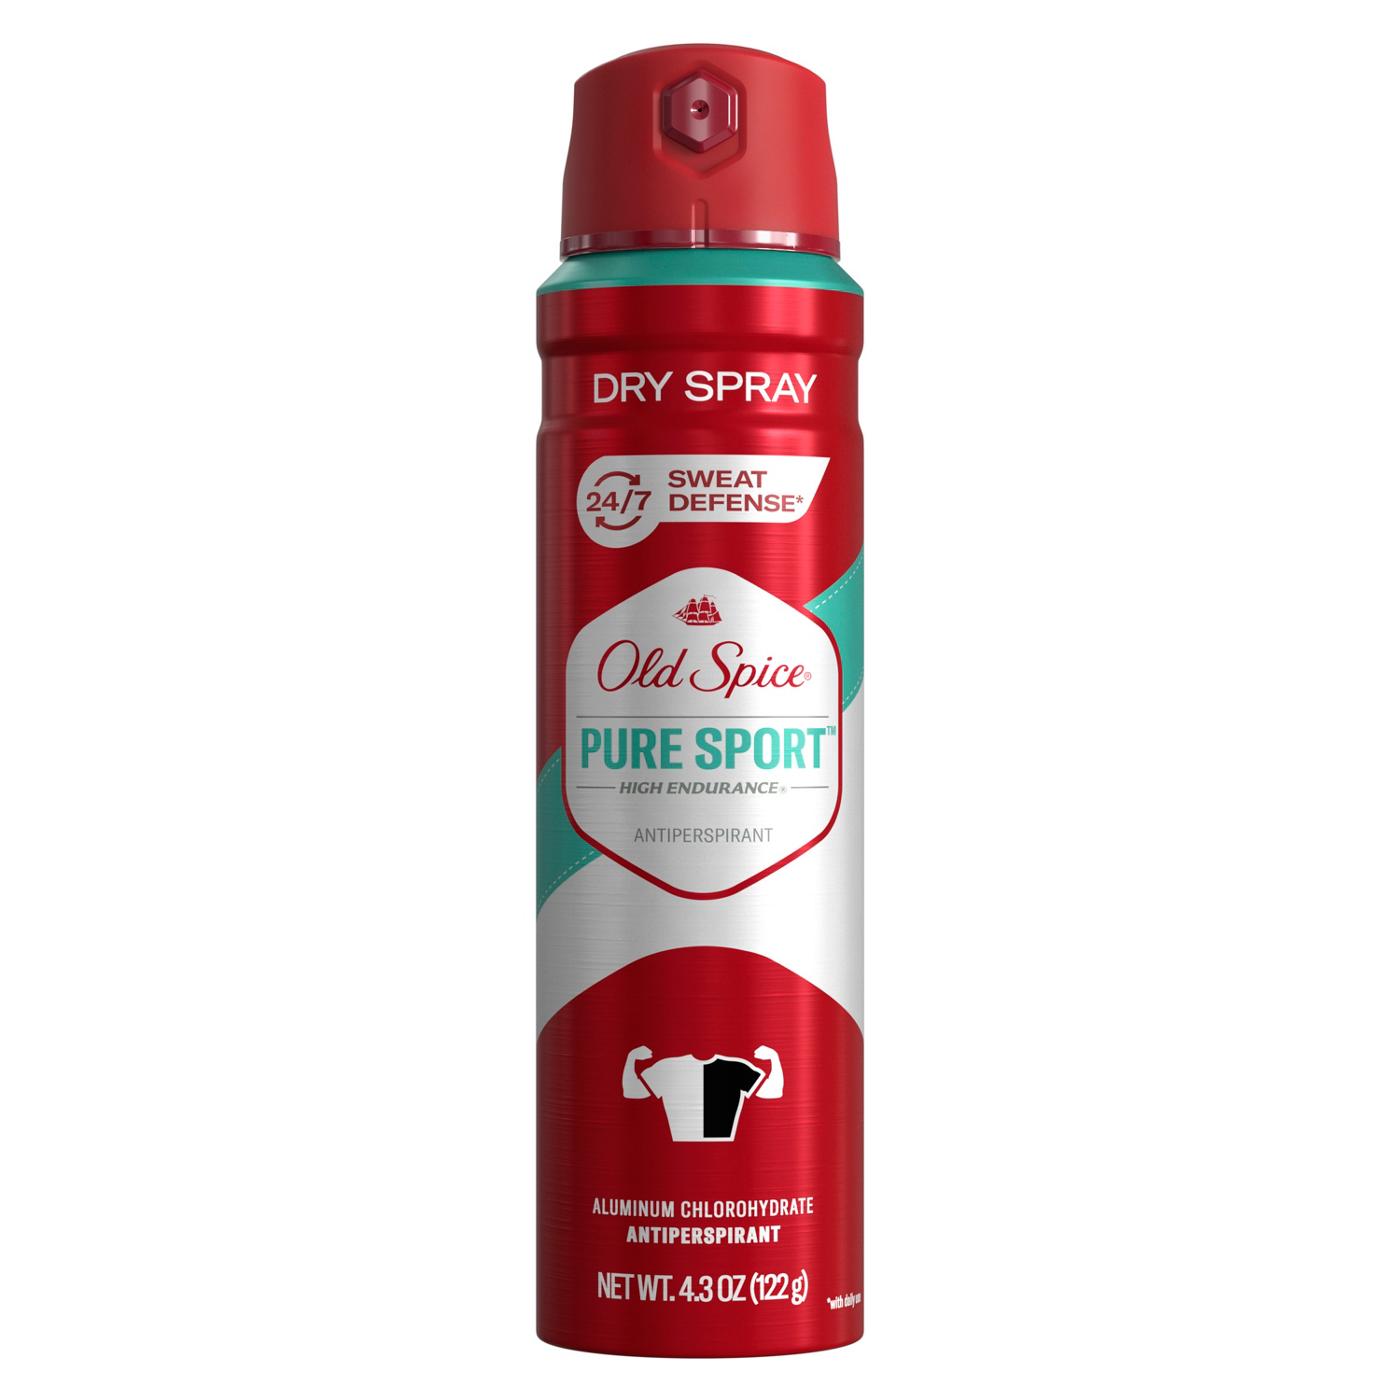 Old Spice Dry Spray Antiperspirant - Pure Sport; image 1 of 2